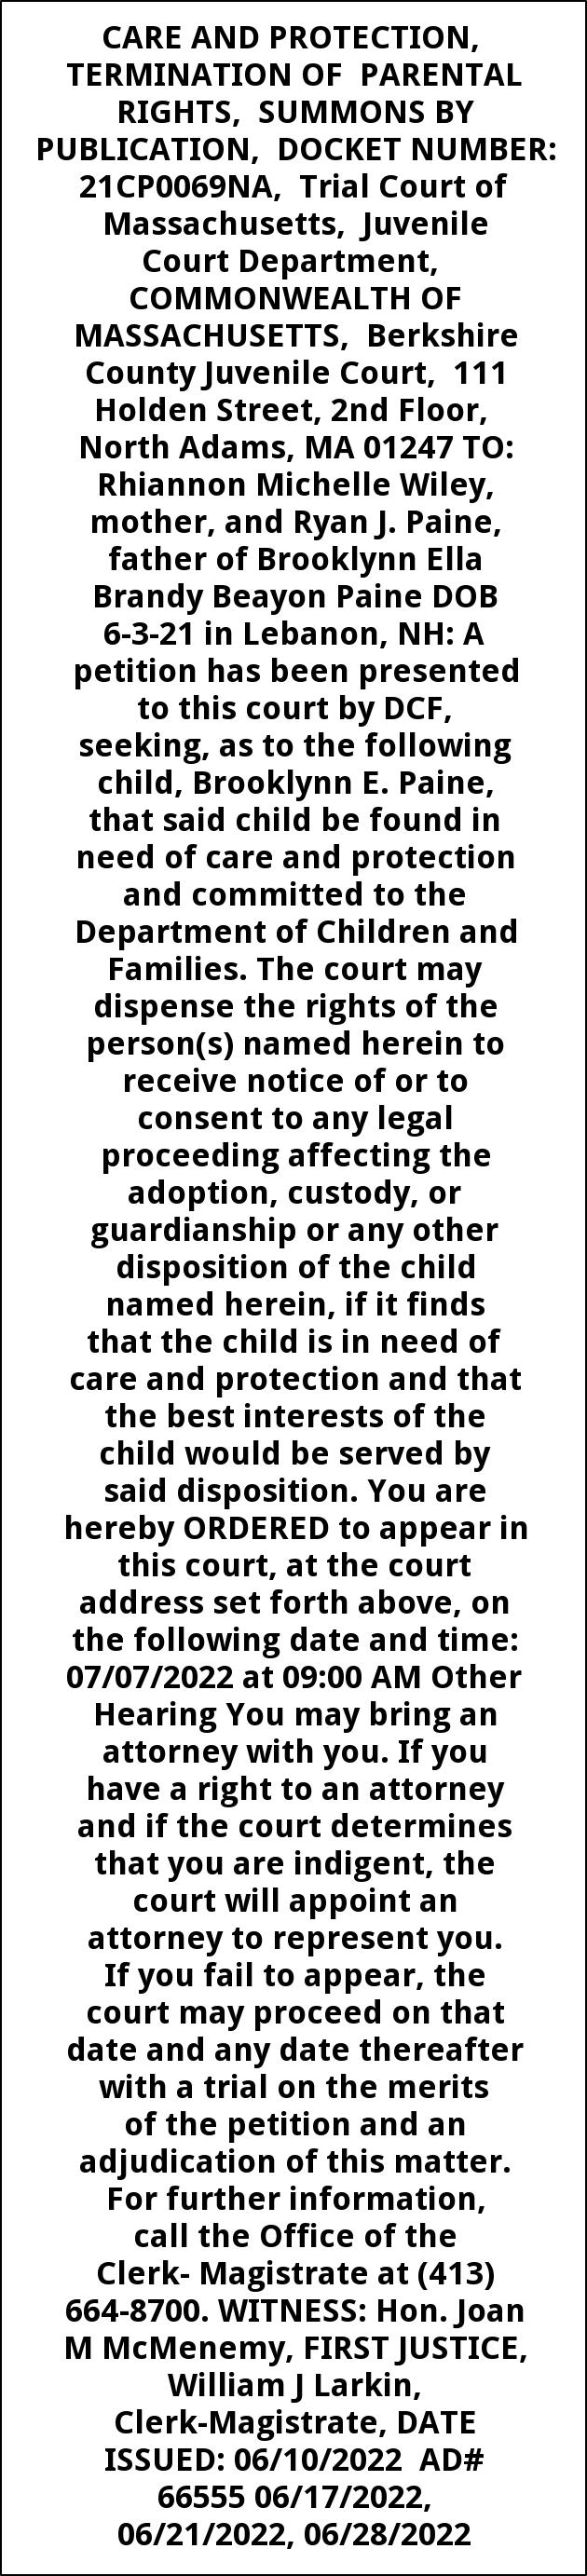 Care and Protection Termination of Parental Rights